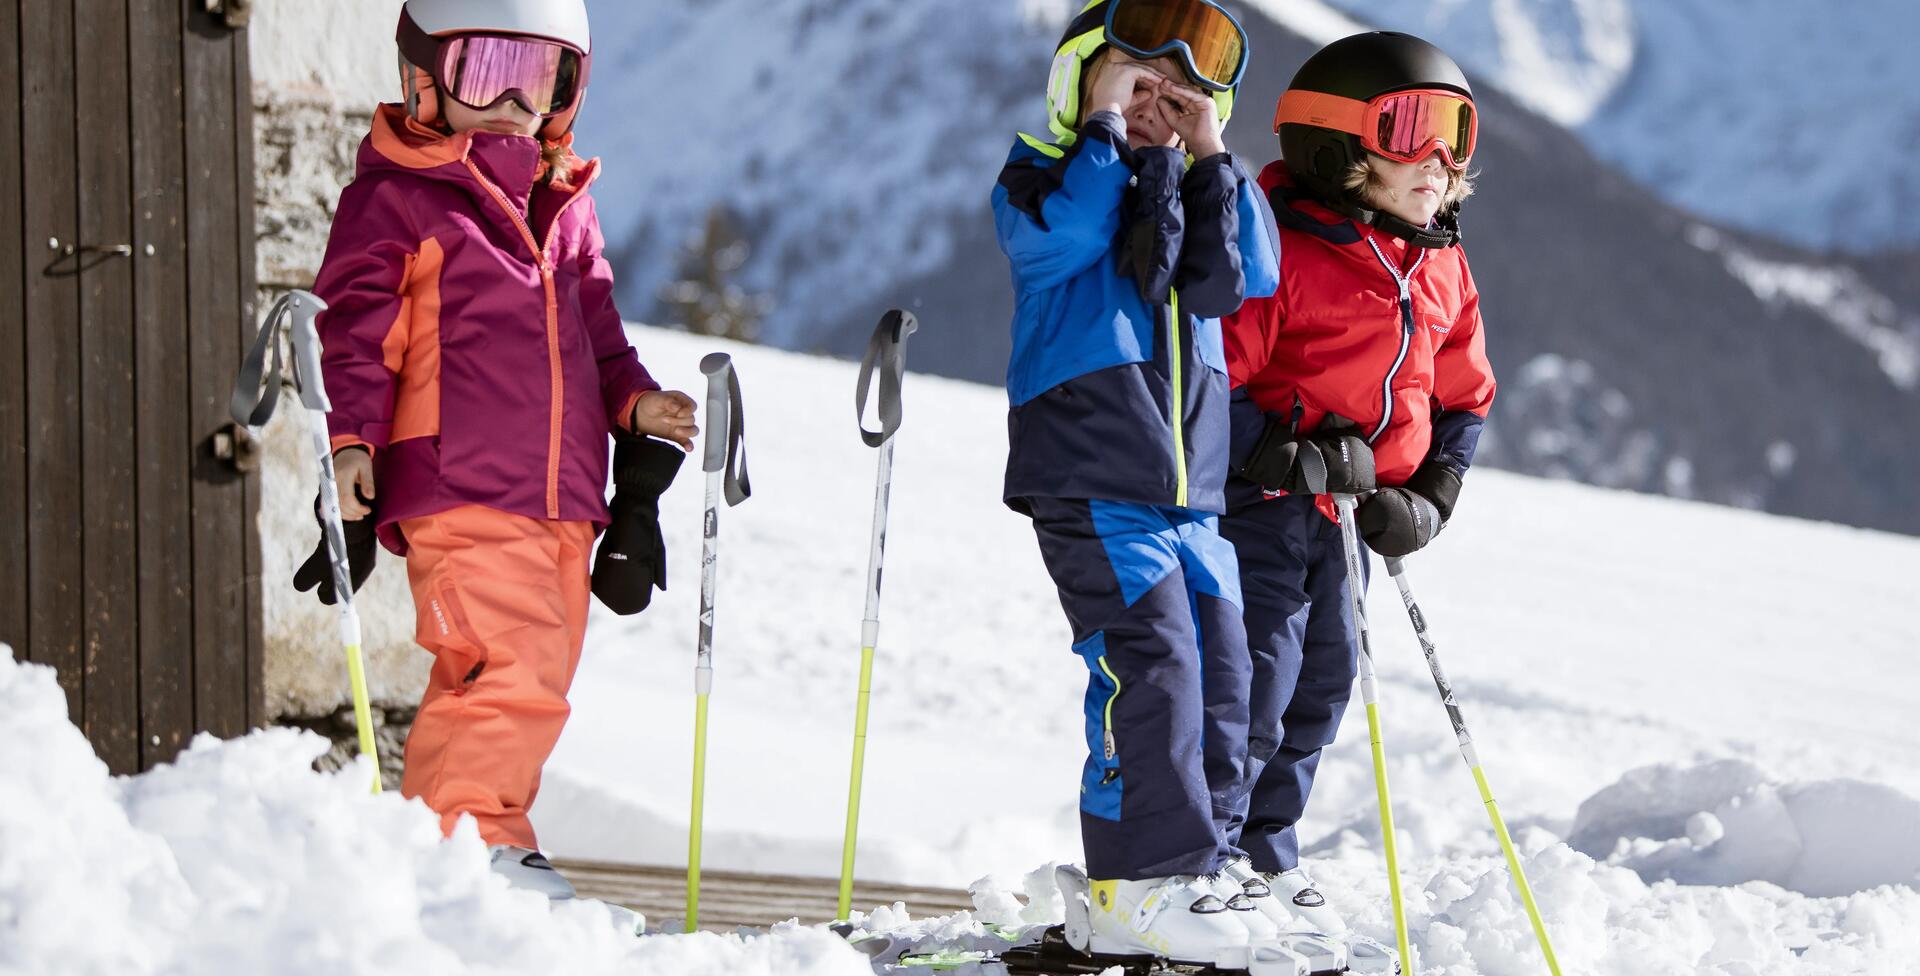 3 kids on their skis preparing to go down the slope